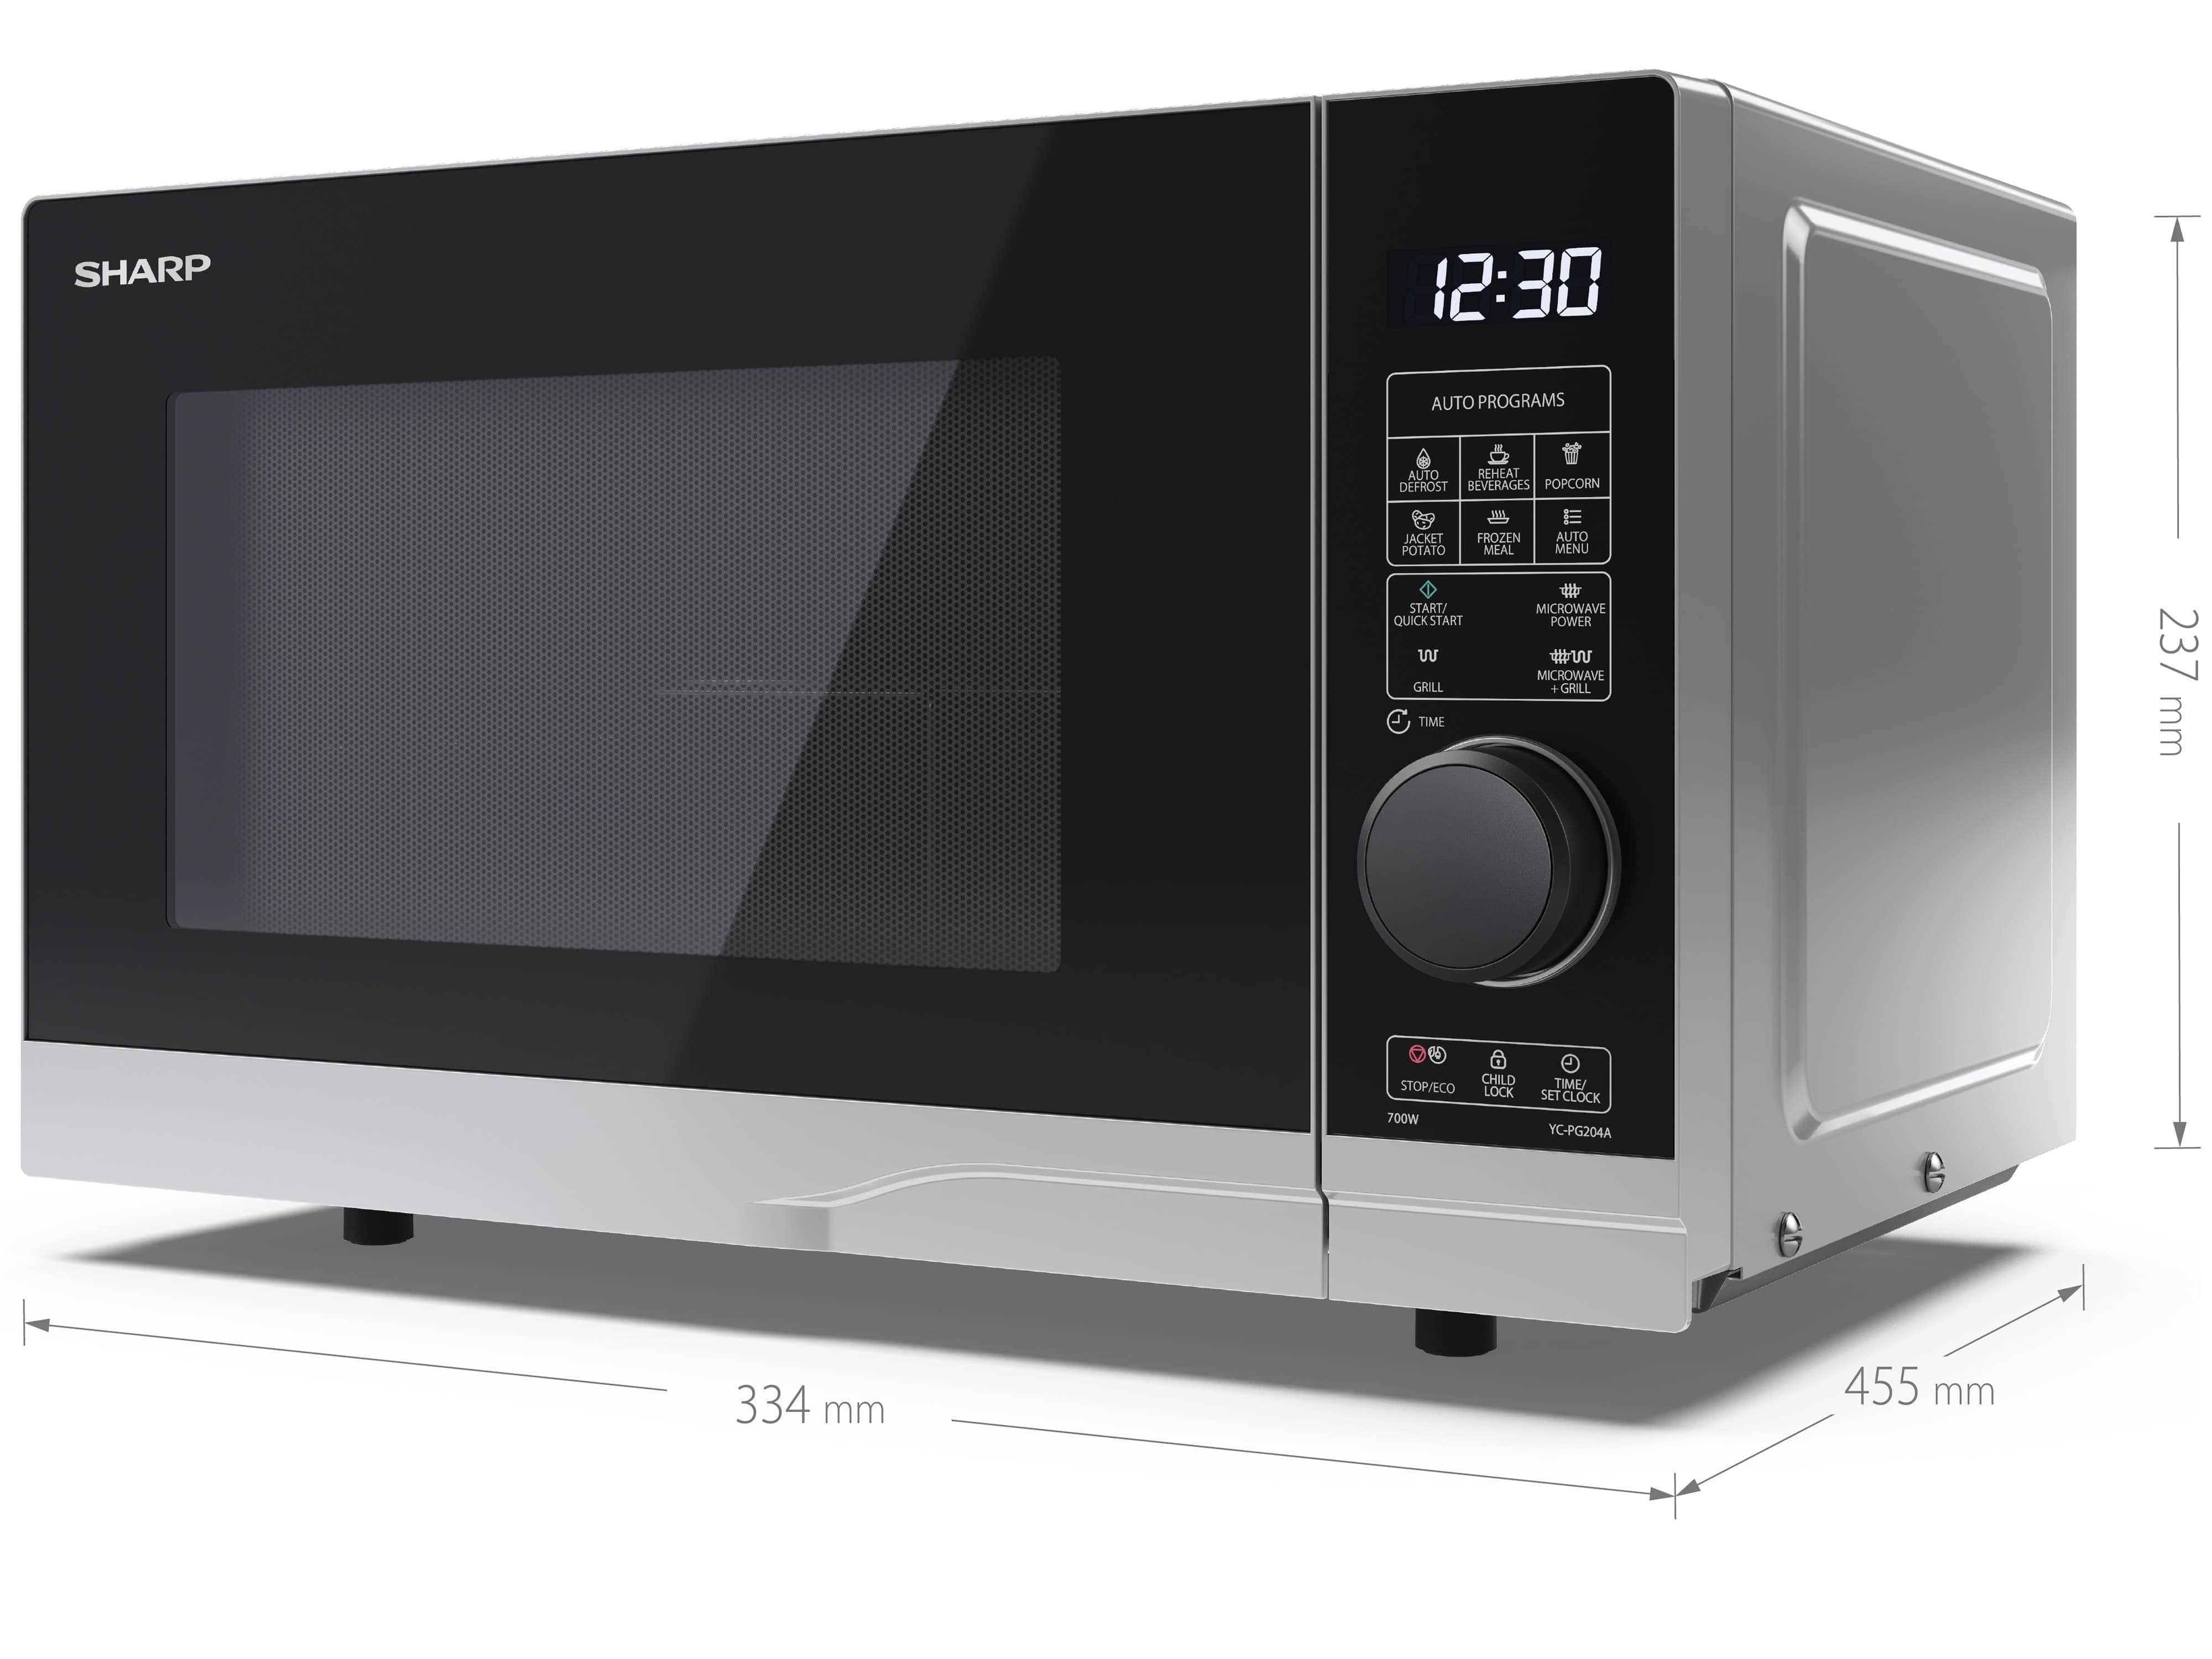 SHARP Mikrowelle YC-PG204AE-S, silber, mit Grill, 20 L, 10-Stufen, 700 W